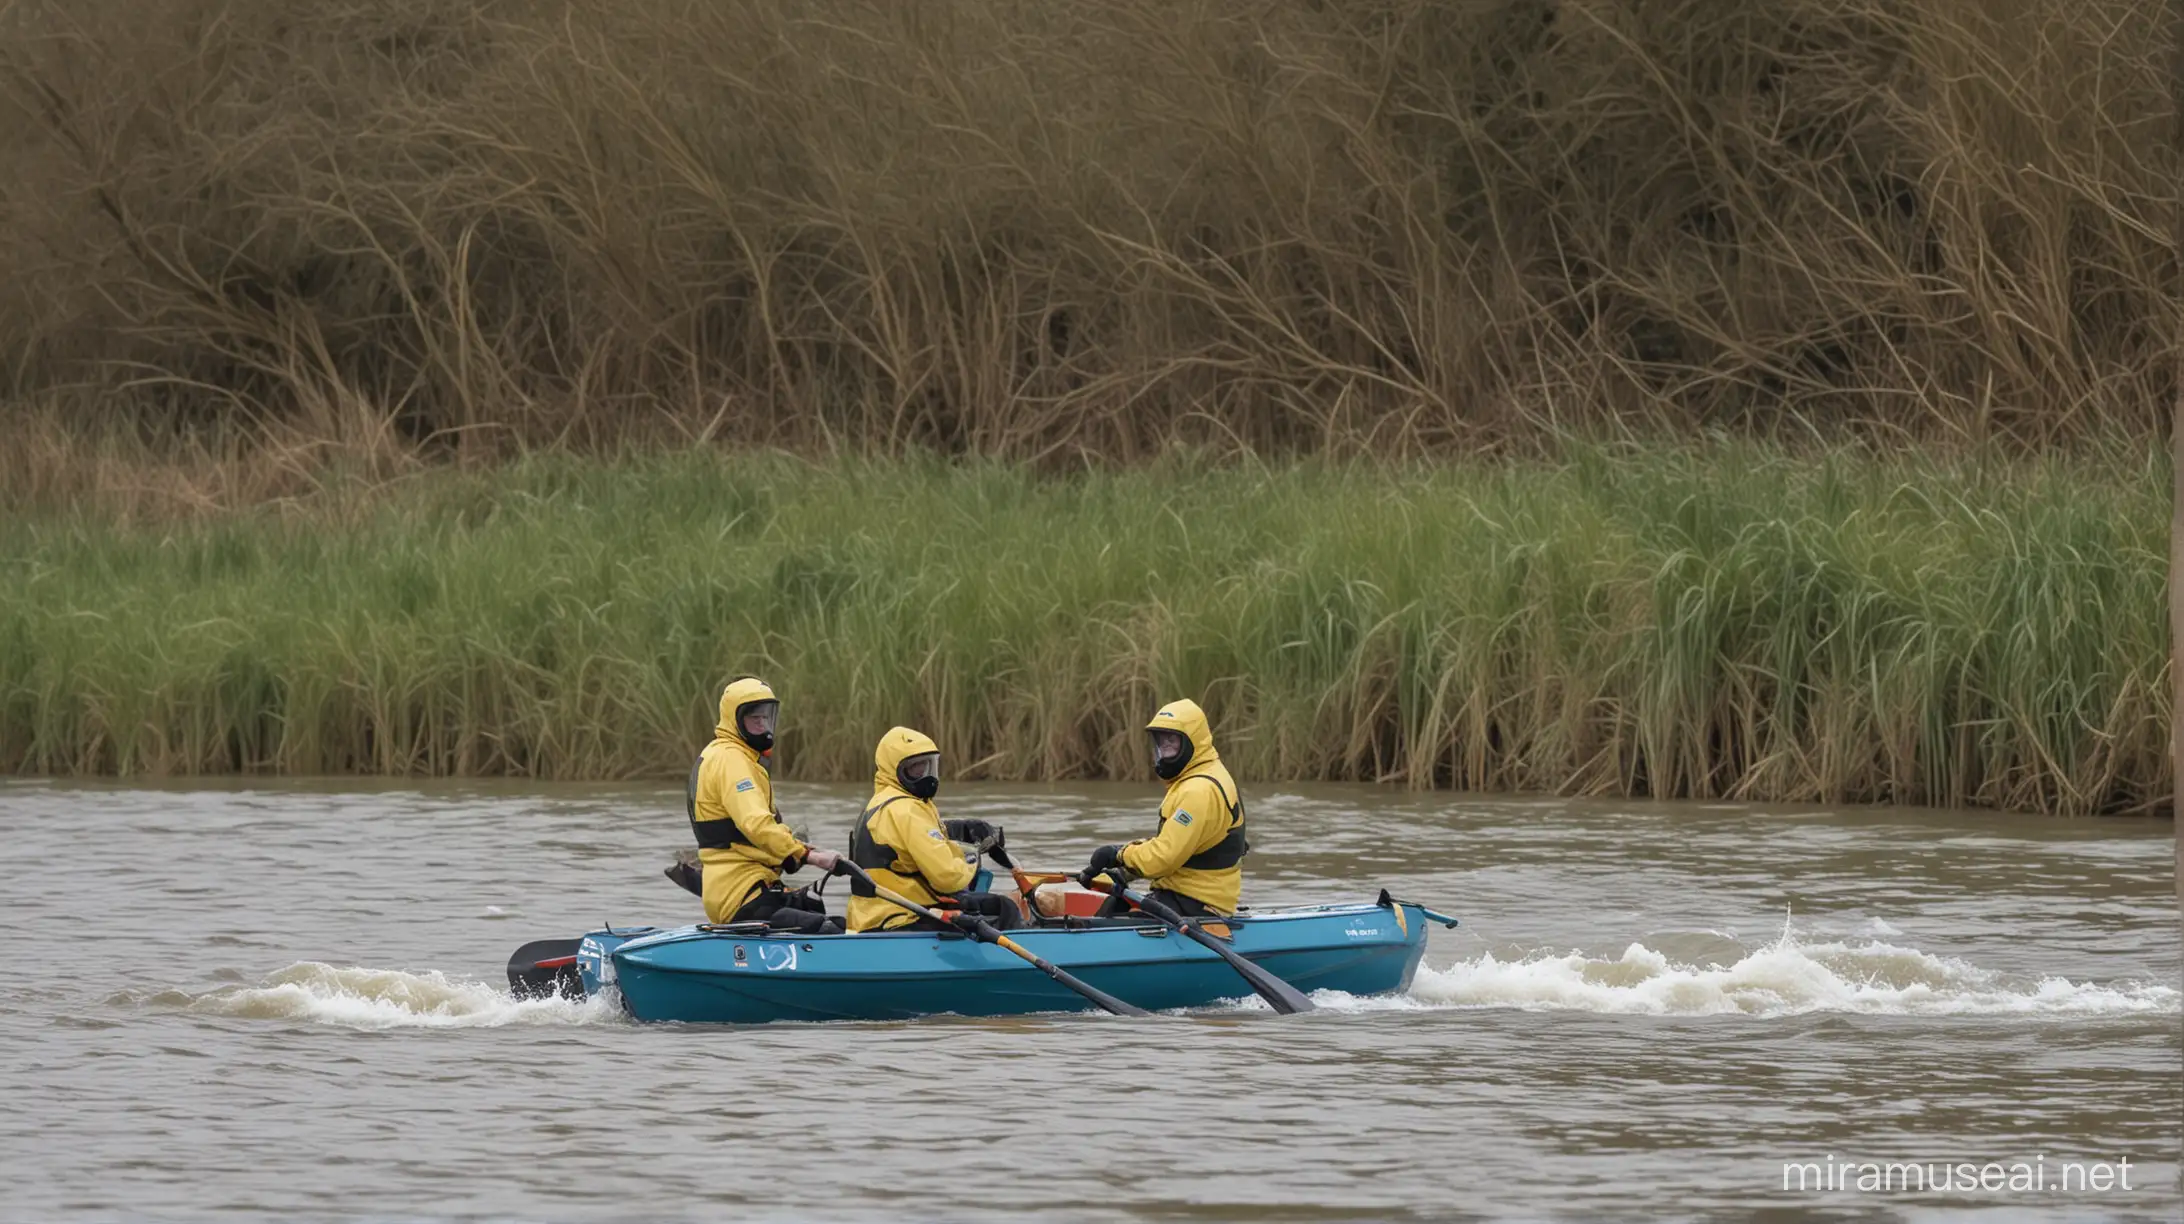 imagine the oxford vs cambridge boat race  crewed by rowers in two differently coloured hazmat suits the water surface is choppy and polluted and there are spectators lining the banks of the river